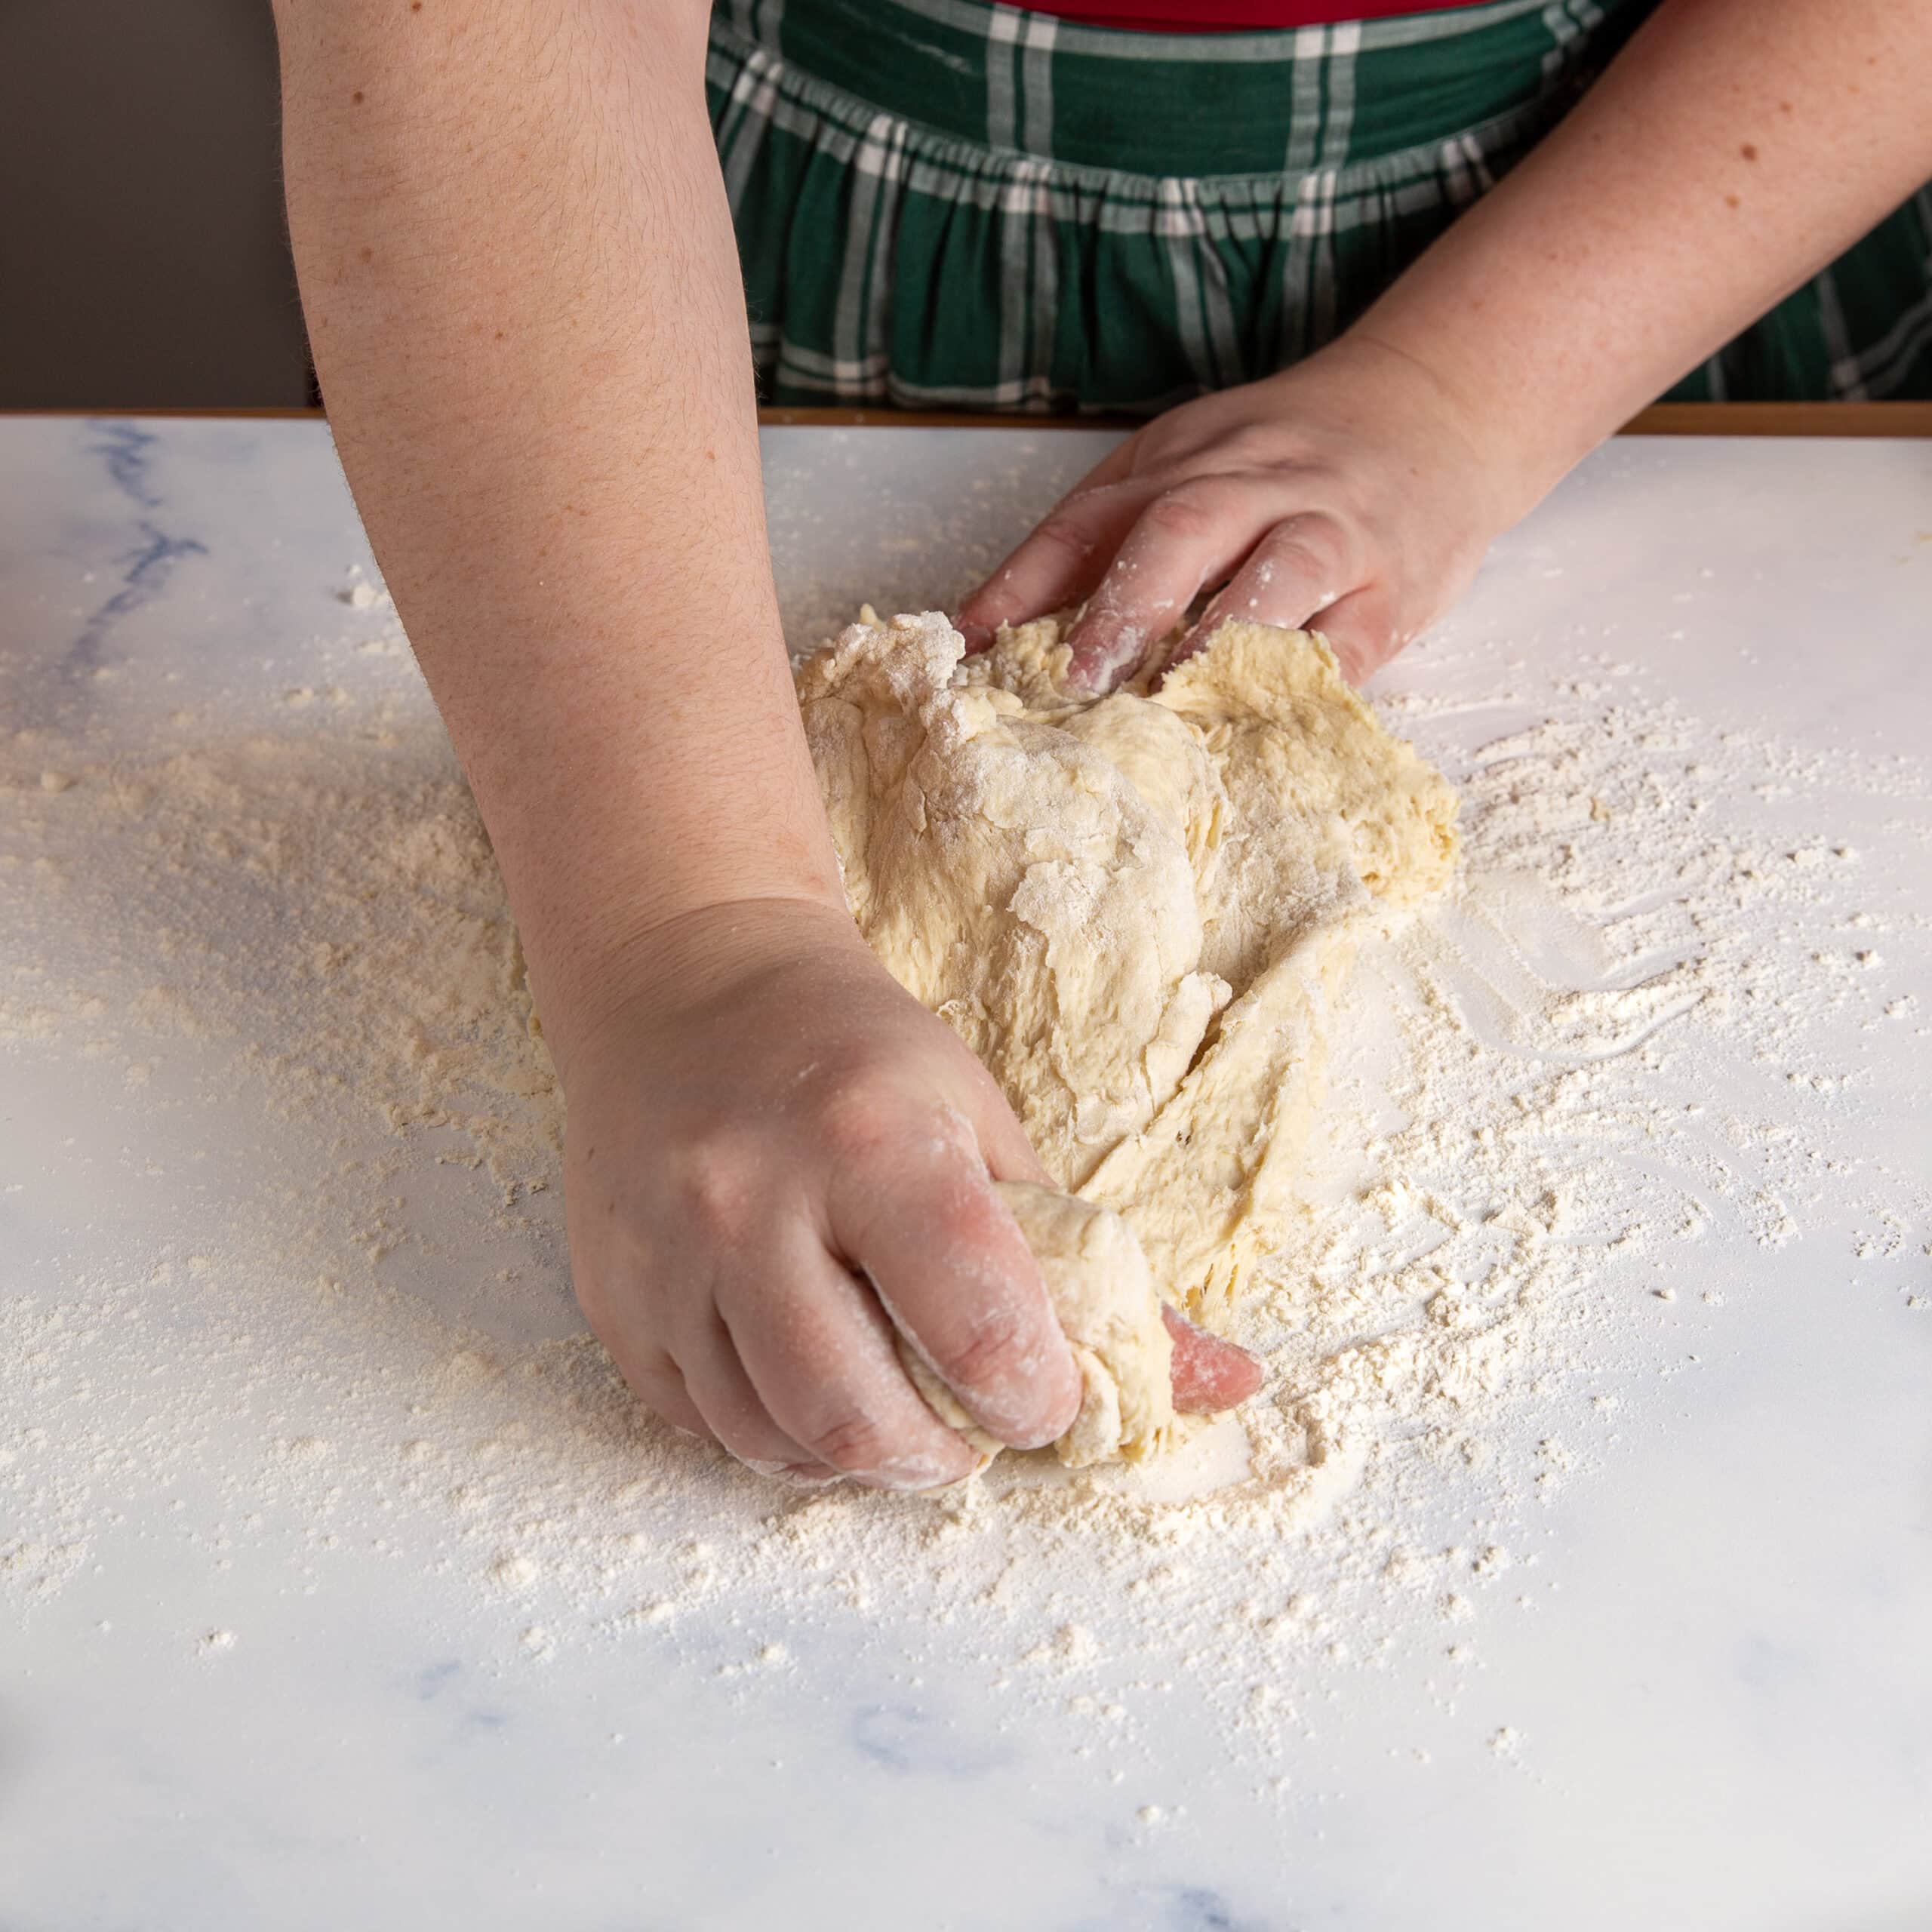 Kneading the dough by hand